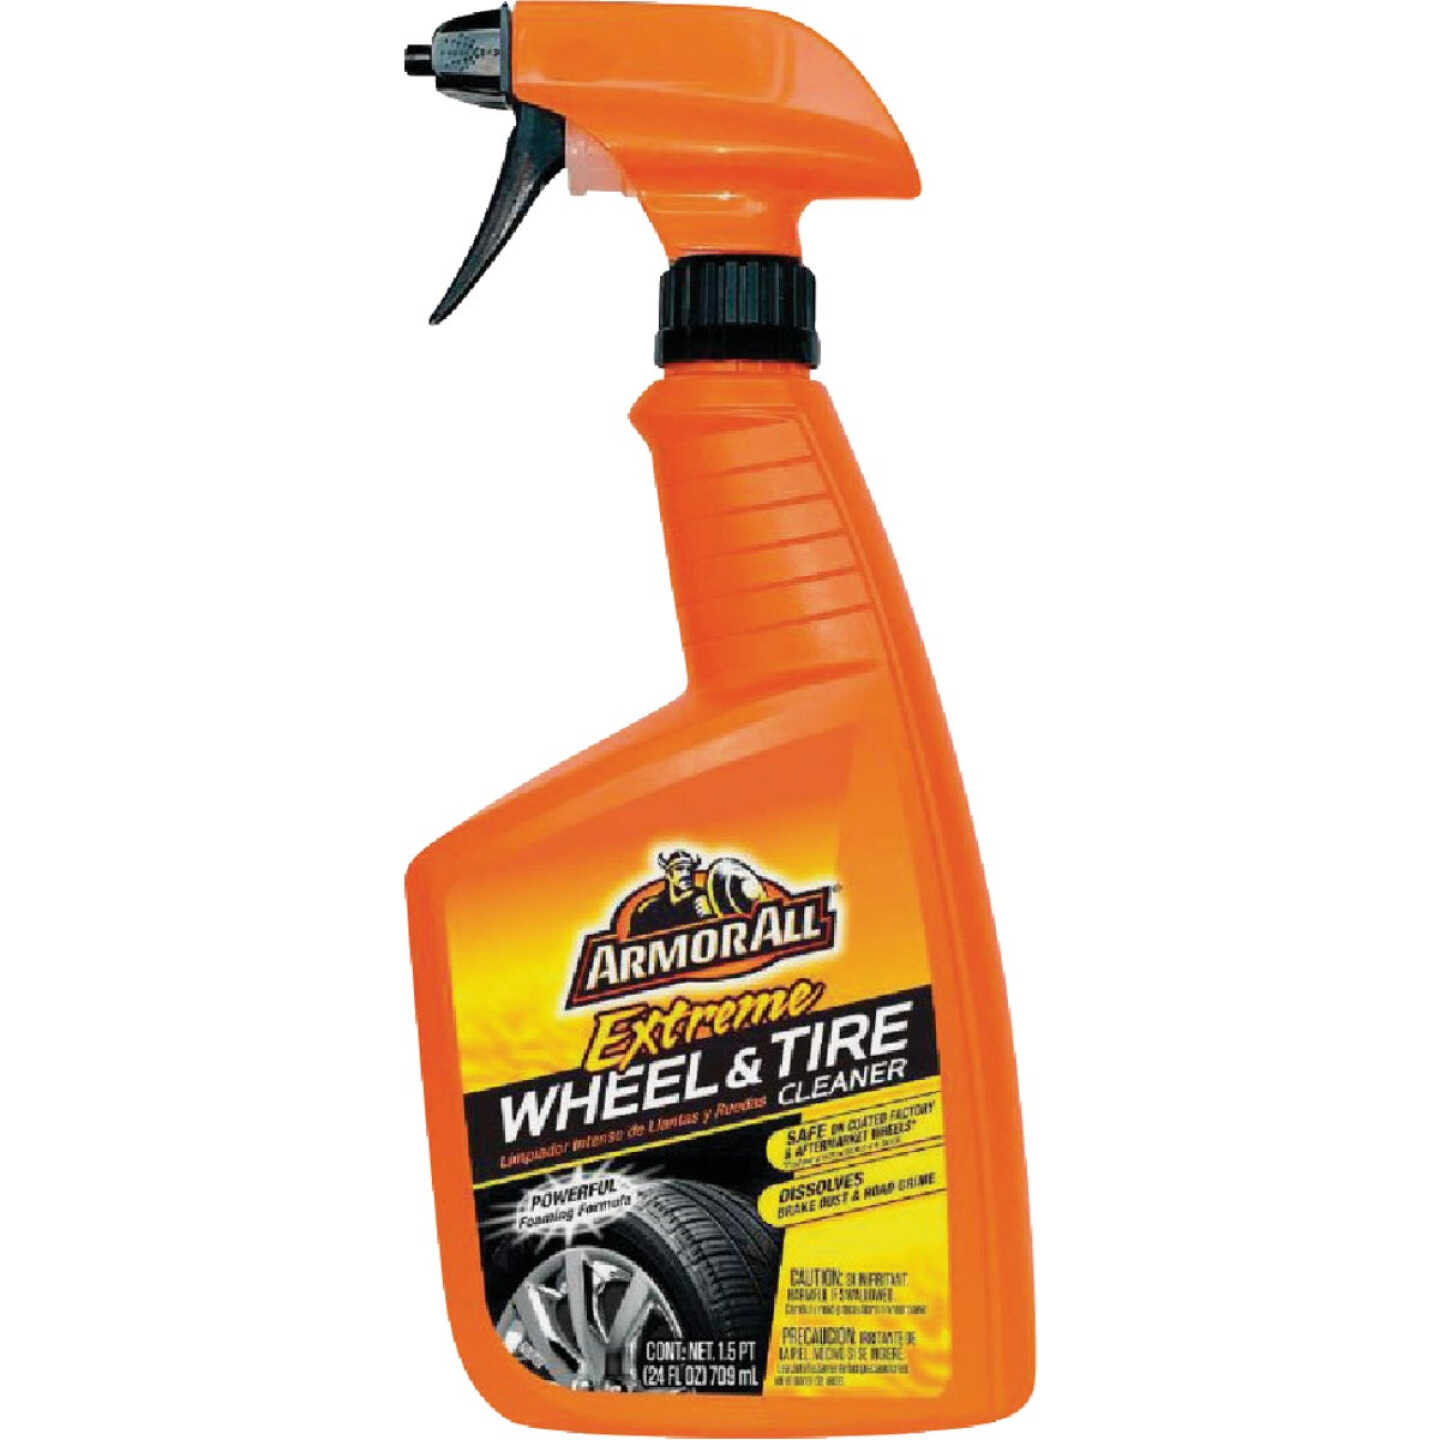 Armor All 24 Oz. Trigger Spray Extreme Wheel and Tire Cleaner - Power  Townsend Company